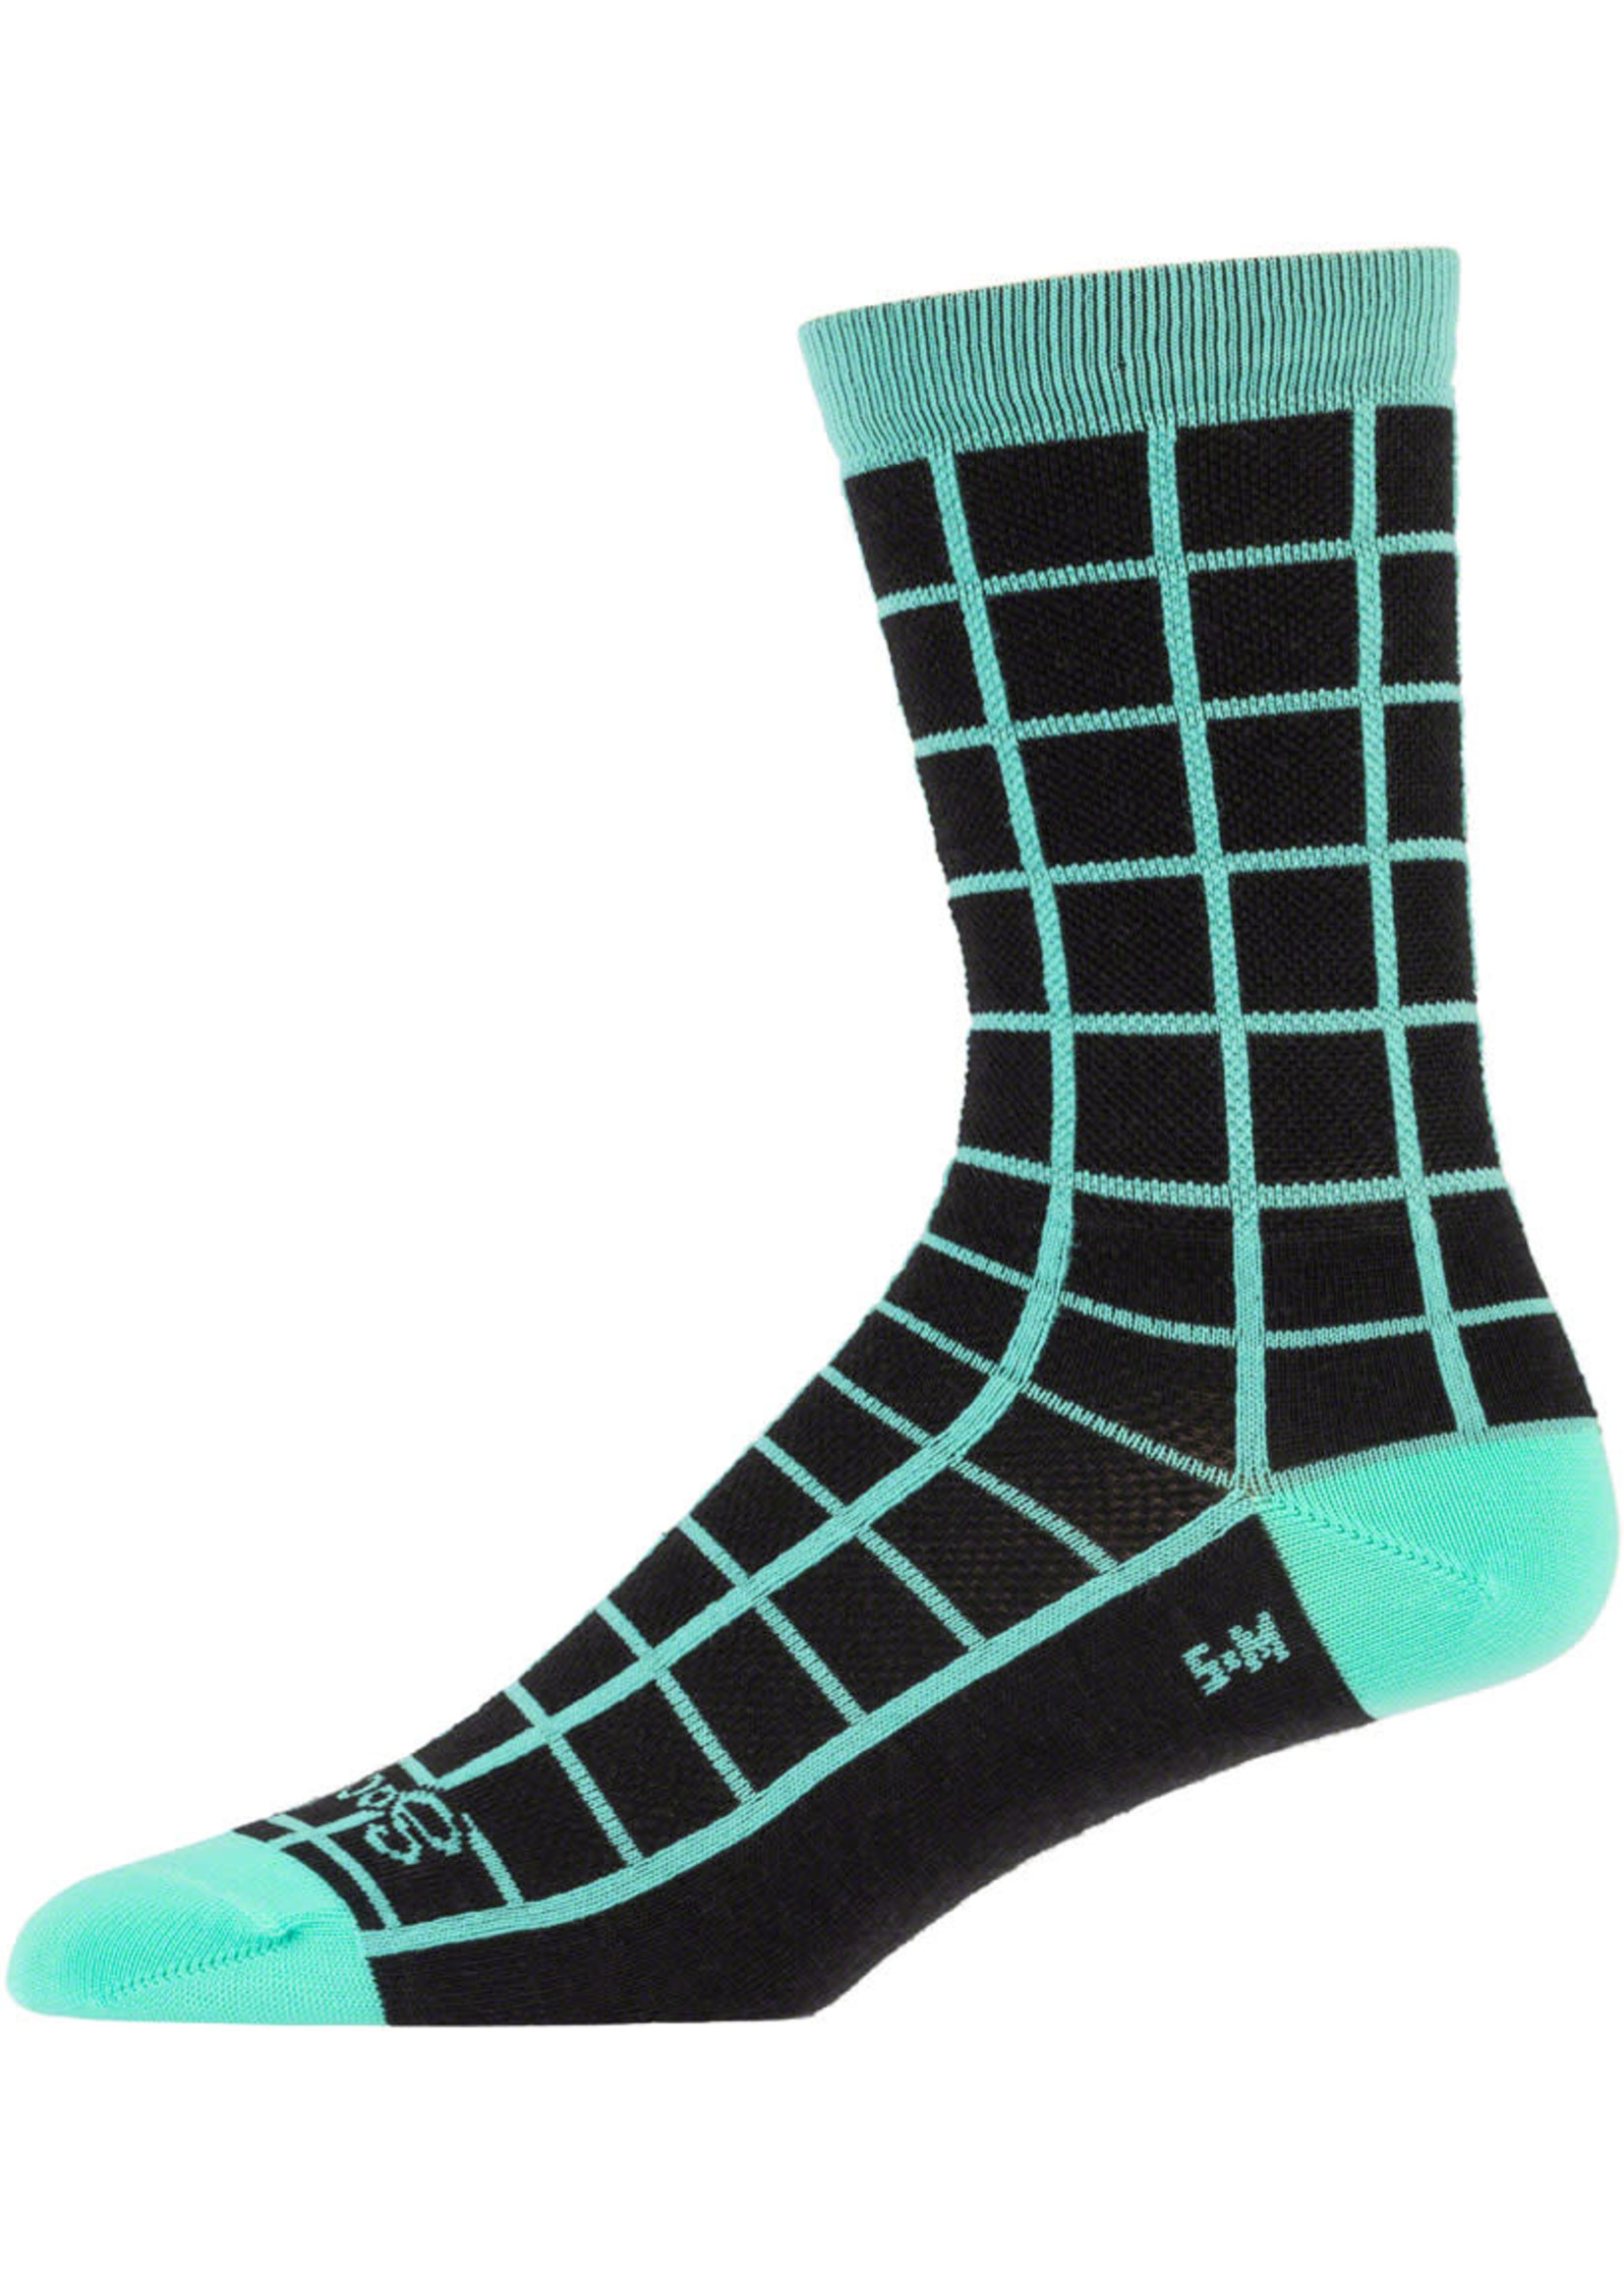 All-City Cycles Chaussettes, All-City Club Tropic - 6", Black, Goldenrod, Teal, Small/Medium